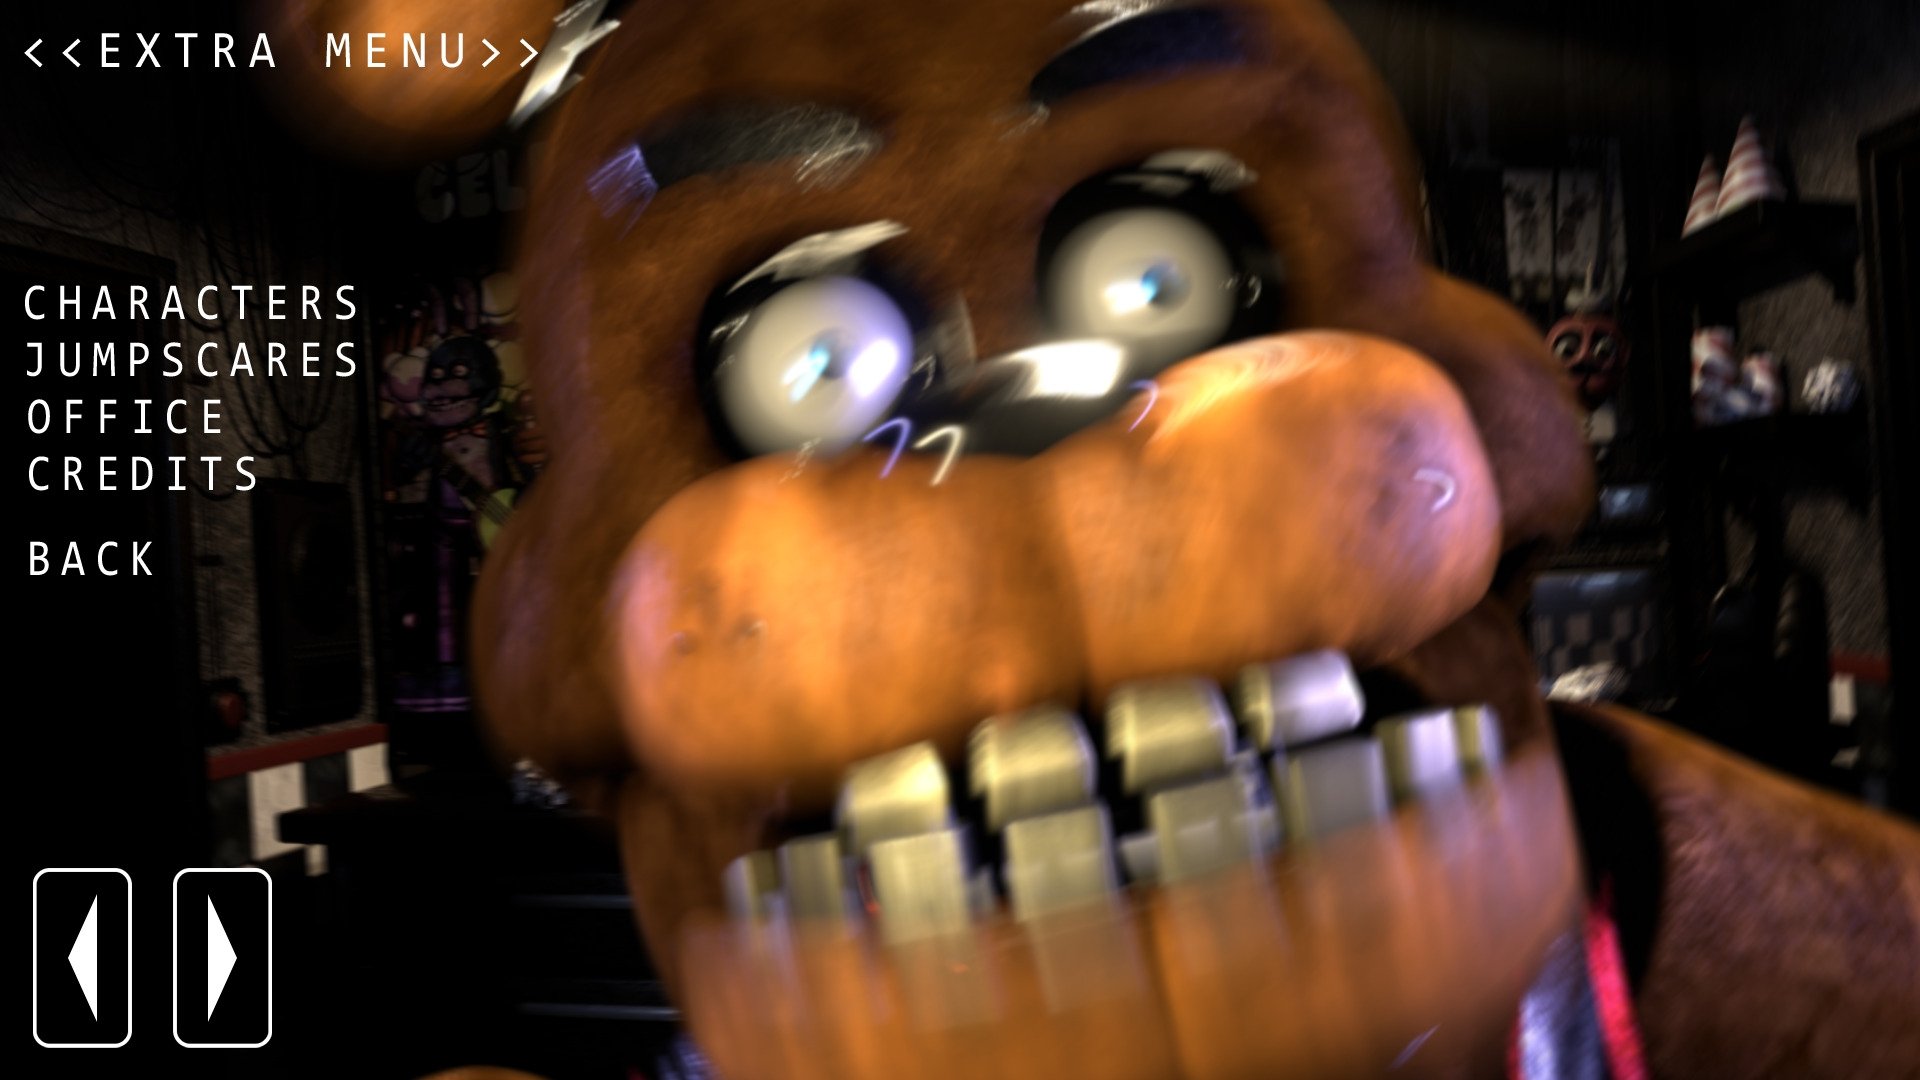 Five Nights at Freddy's Plus: Fanmade v5 (PC/Mobile) 